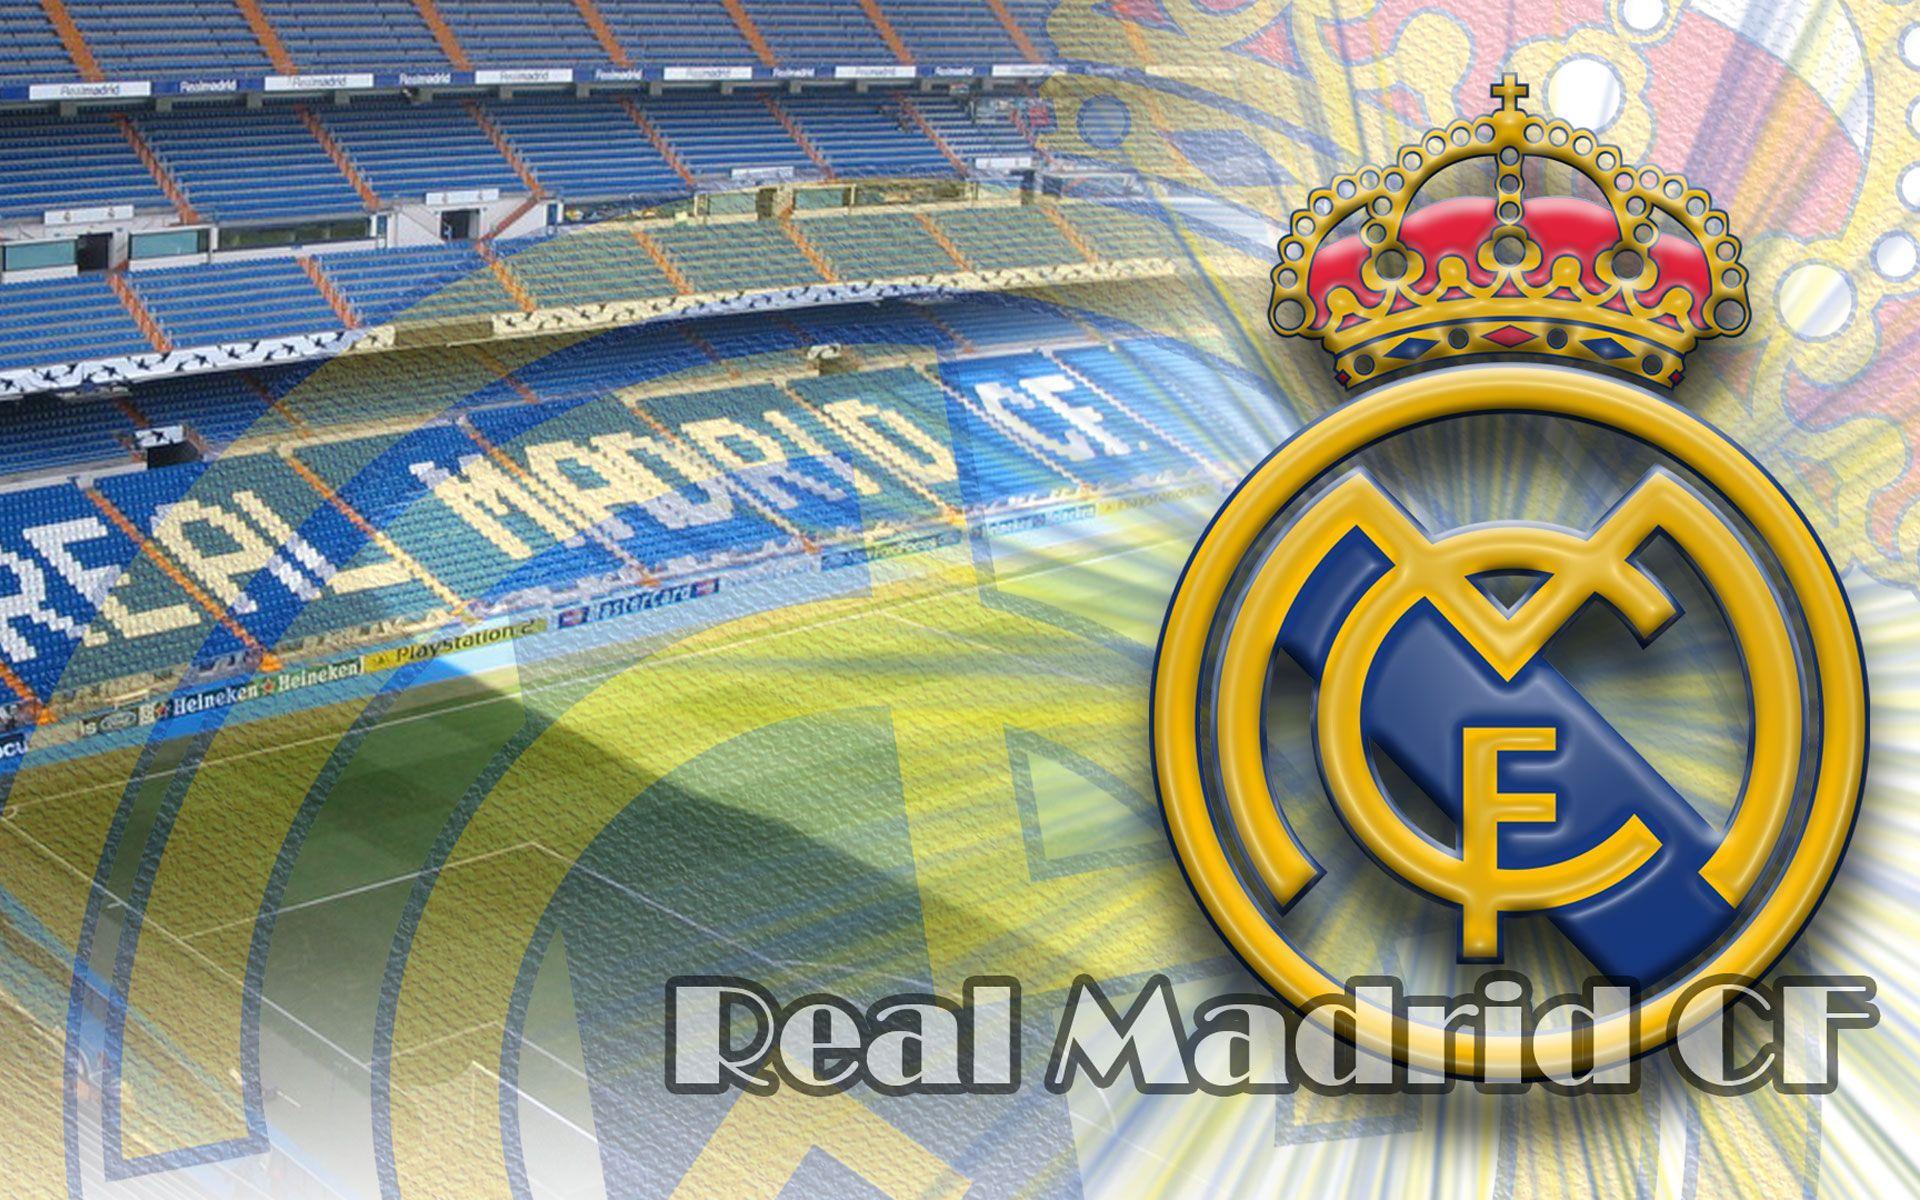 Real Madrid Fc Wallpapers Wallpaper Cave 9194